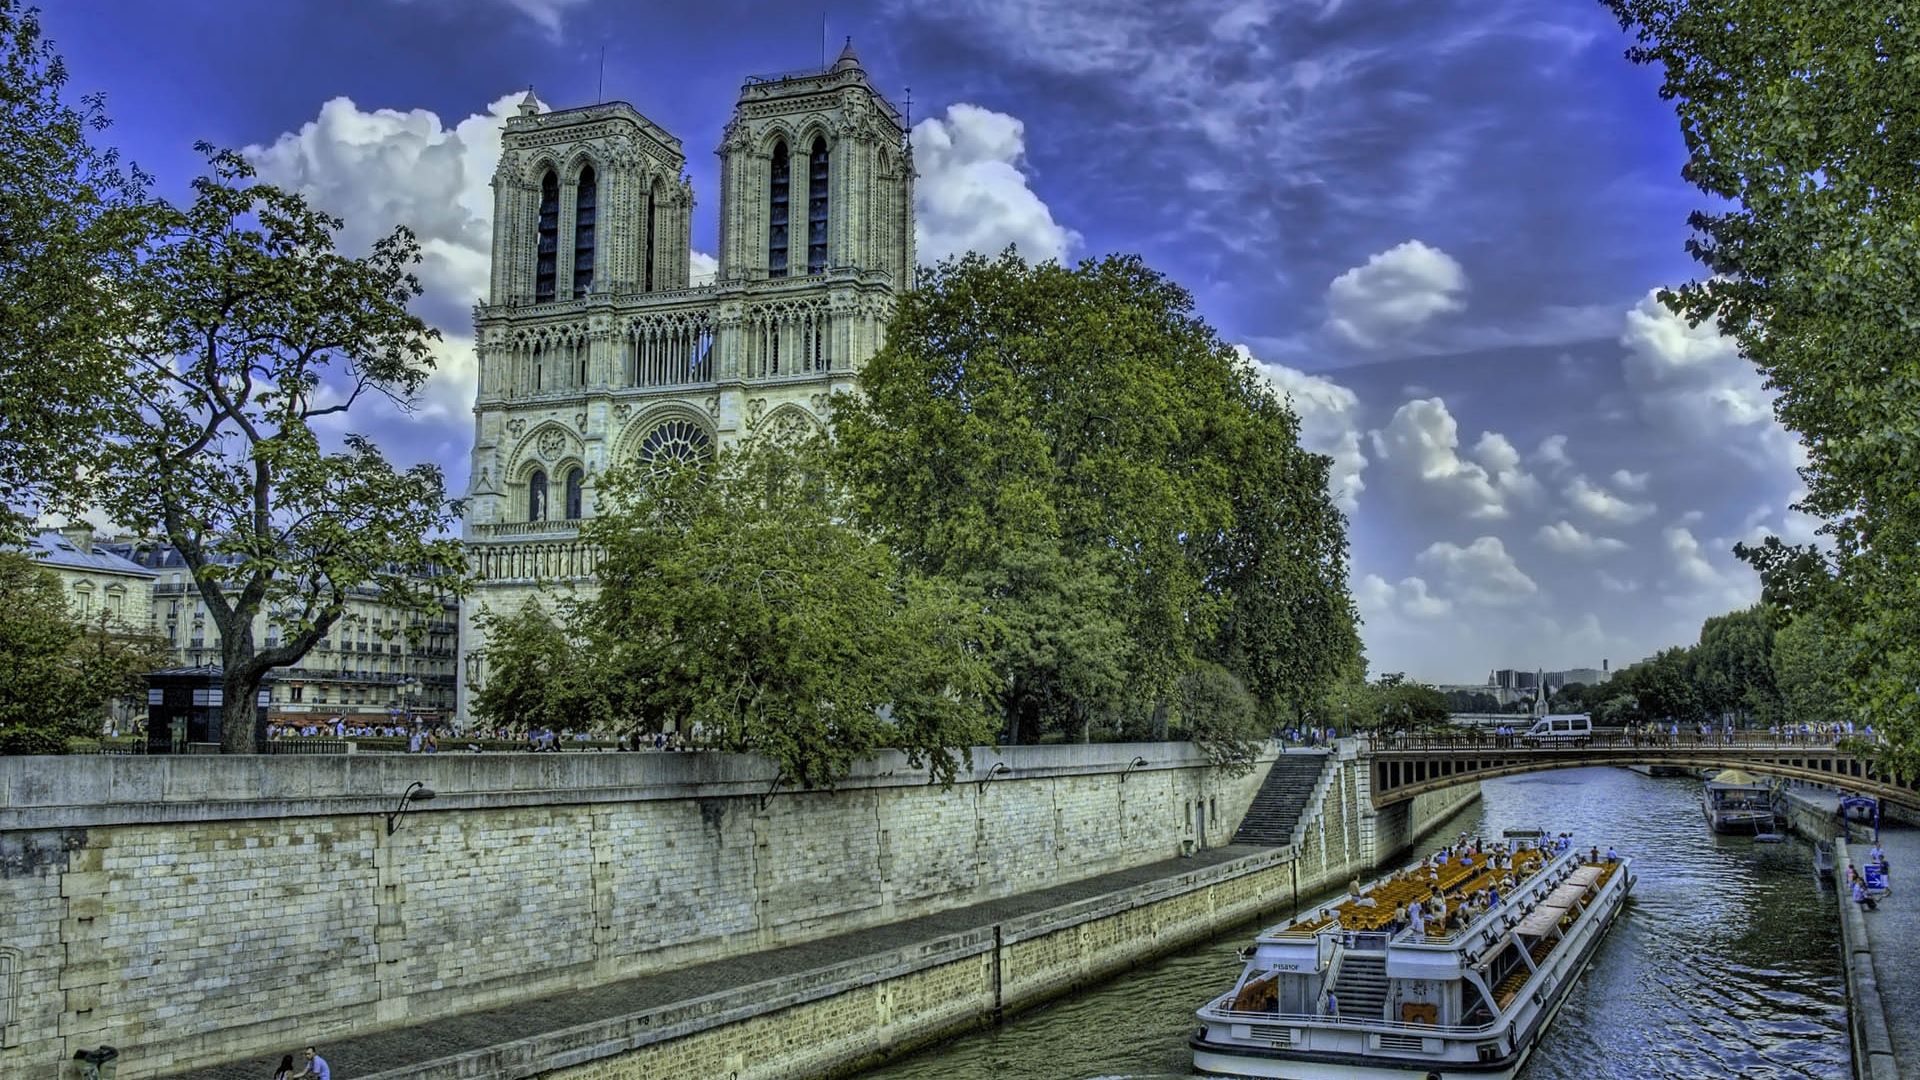 Popular Notre Dame Cathedral images for mobile phone